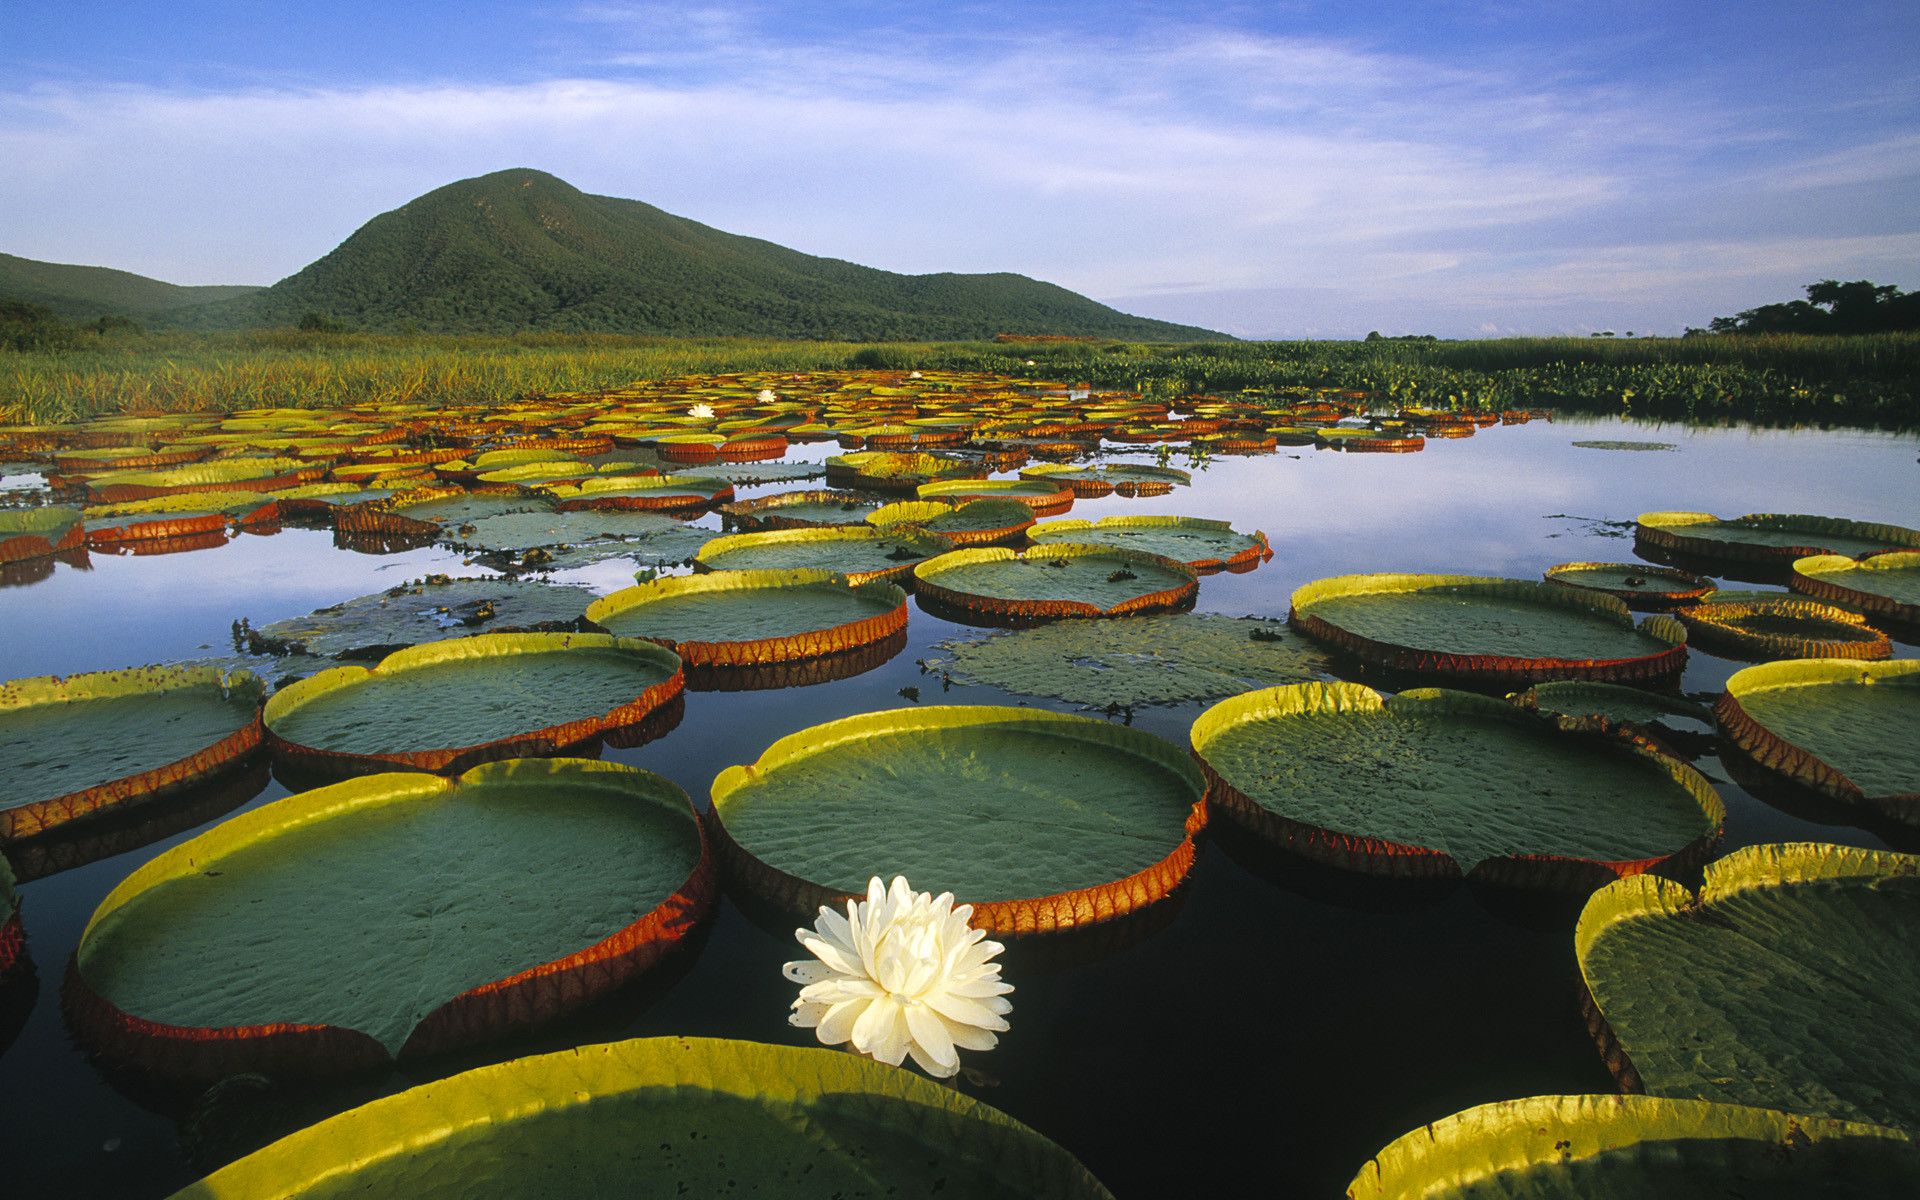 The Pantanal's Largest Wetland